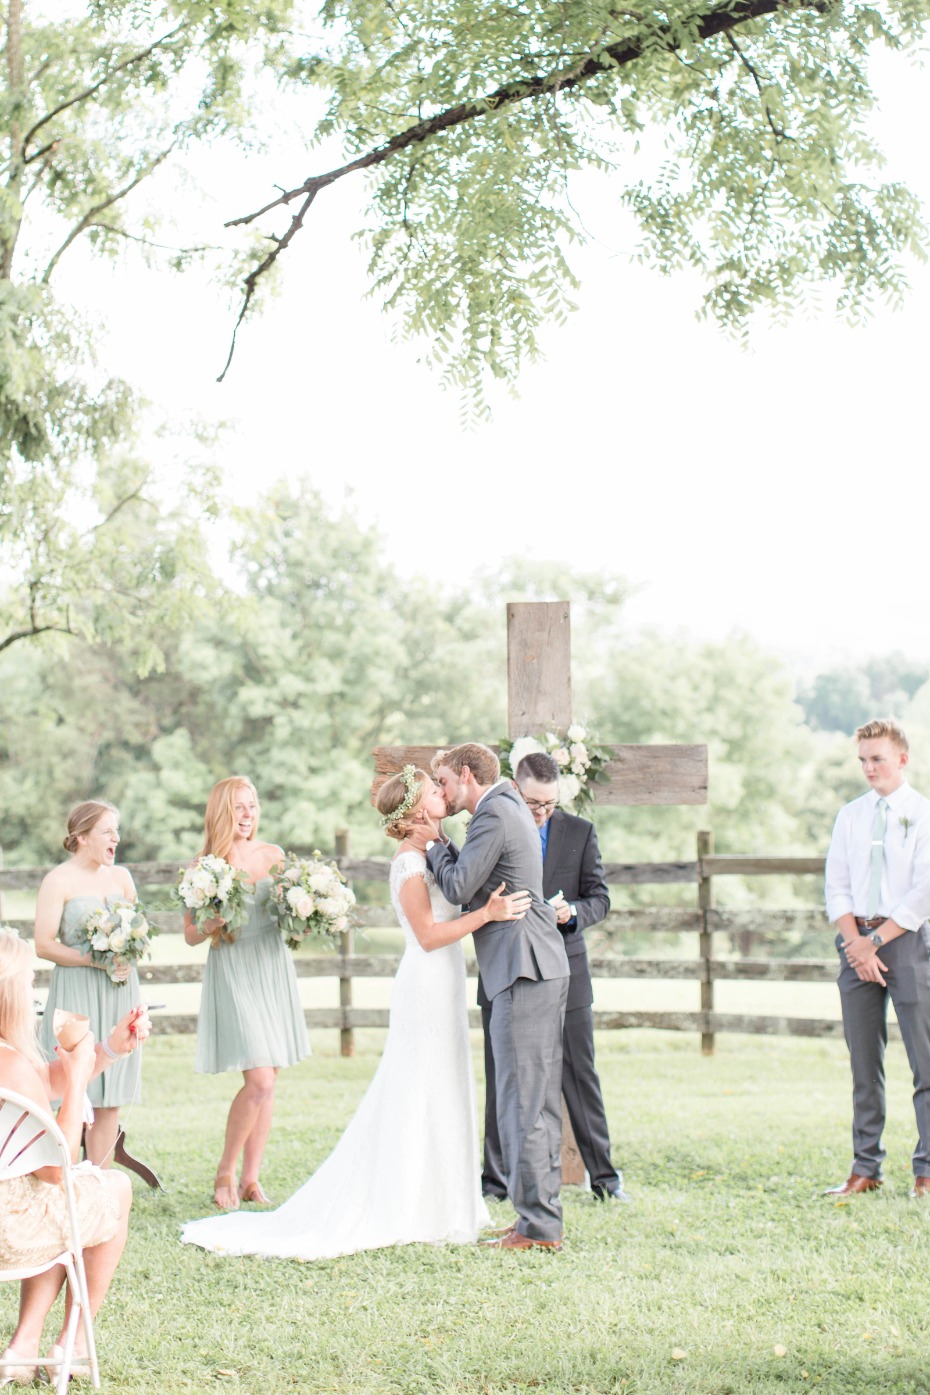 Wedding ceremony idea - get married under a tree in front of a wooden cross